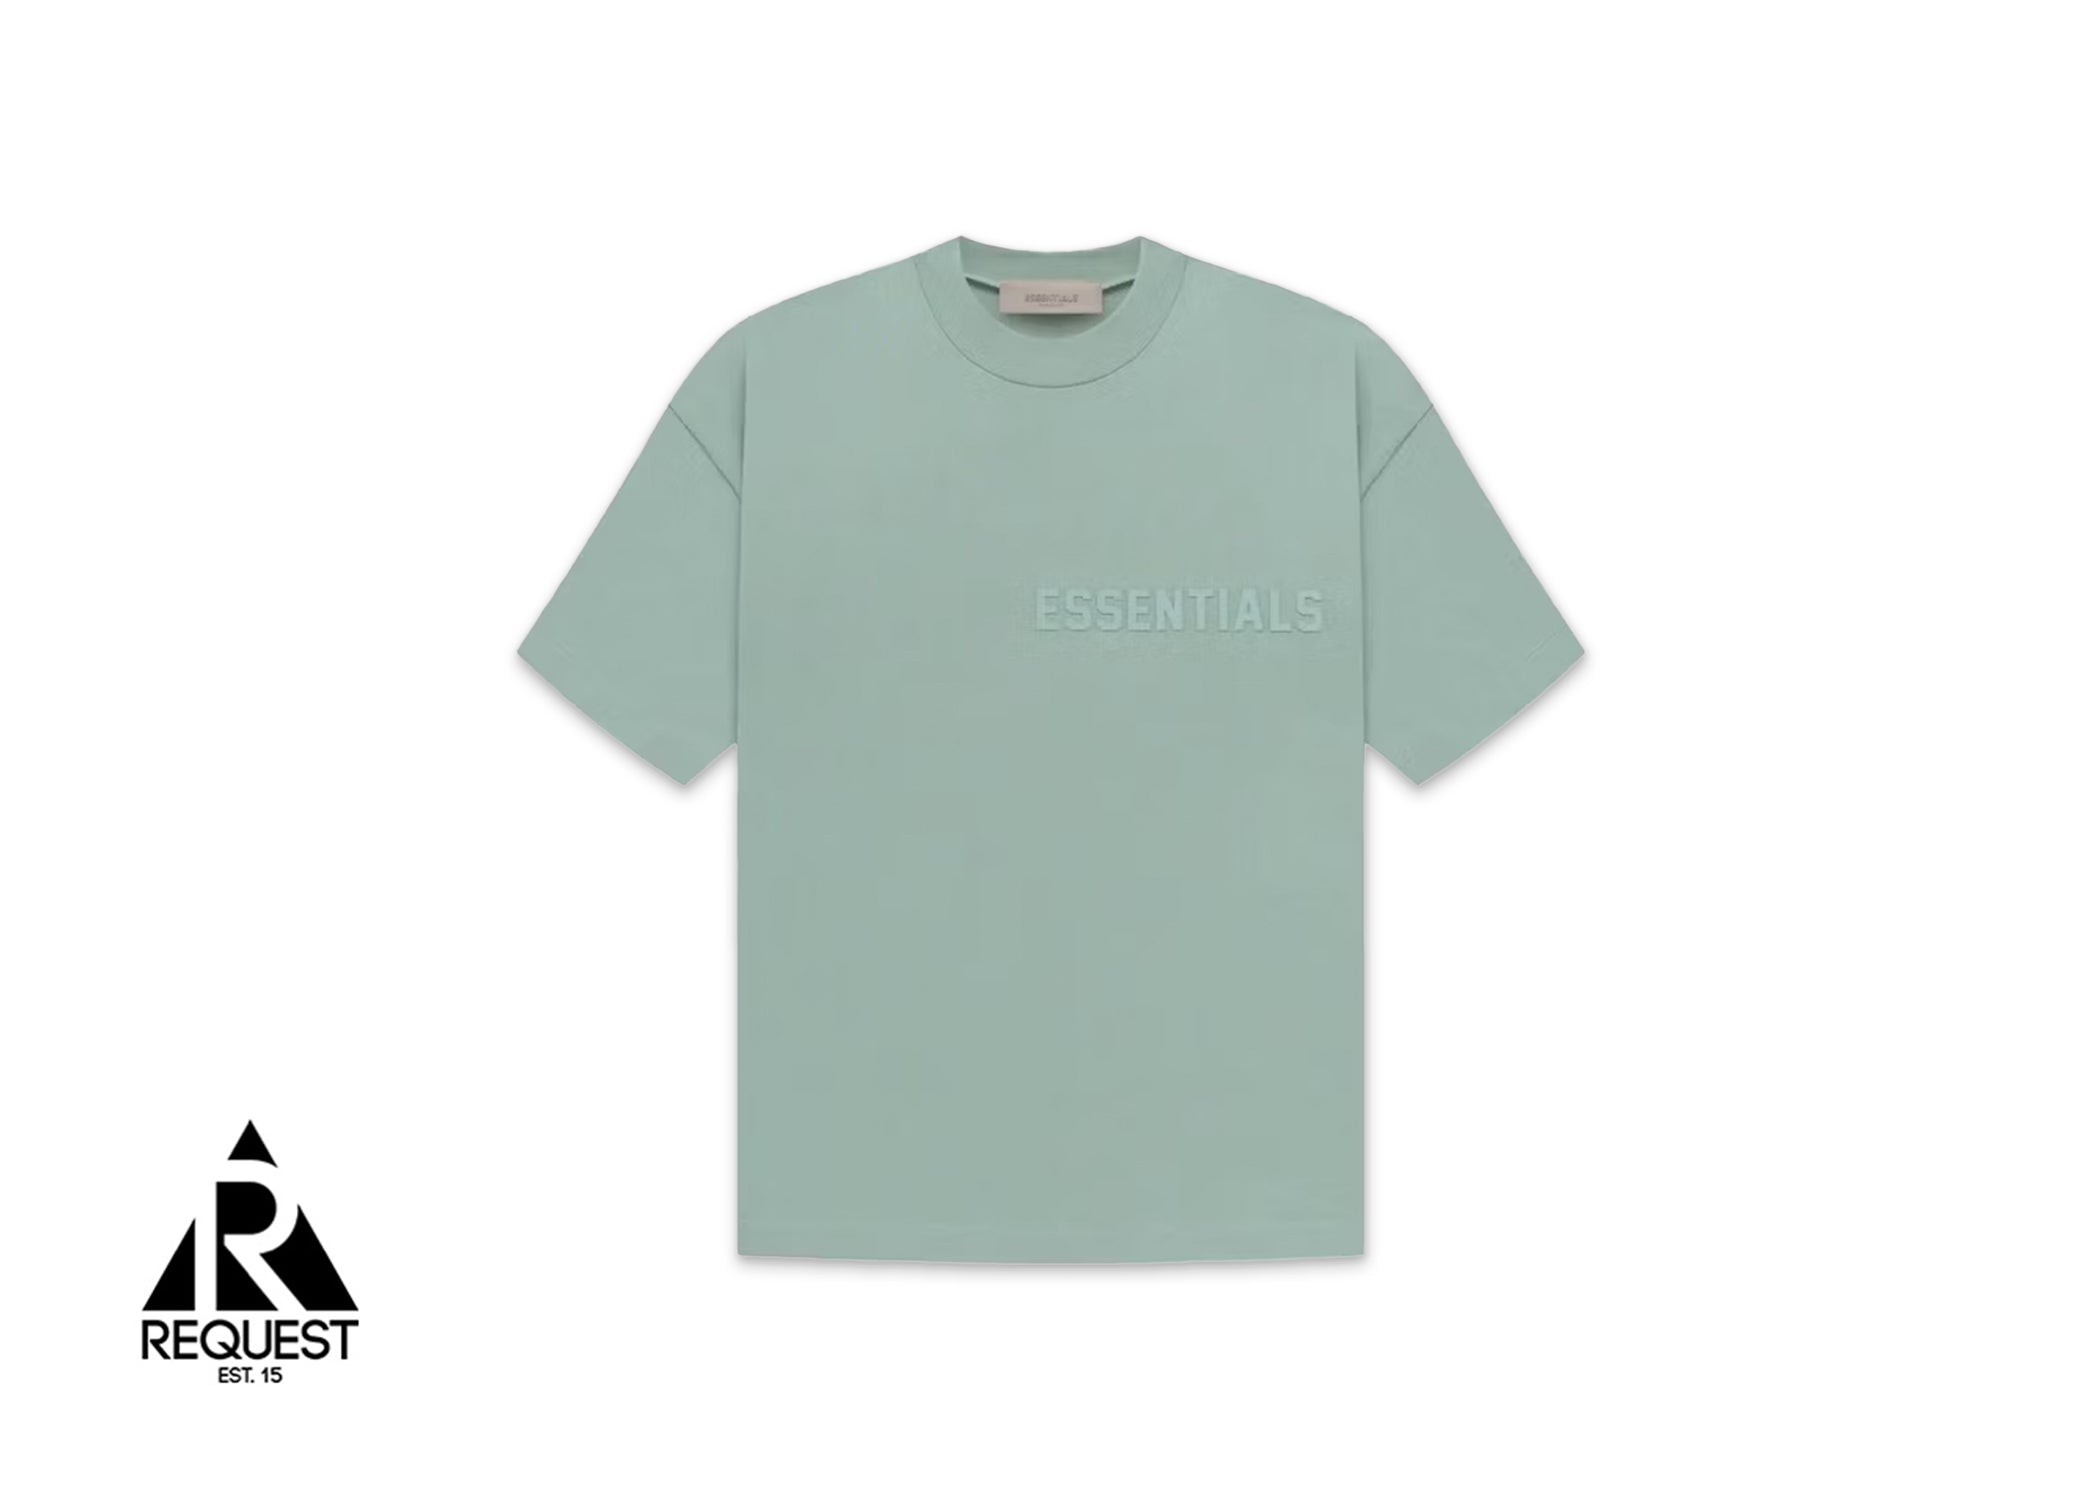 Fear of God Essentials Tee “Sycamore”